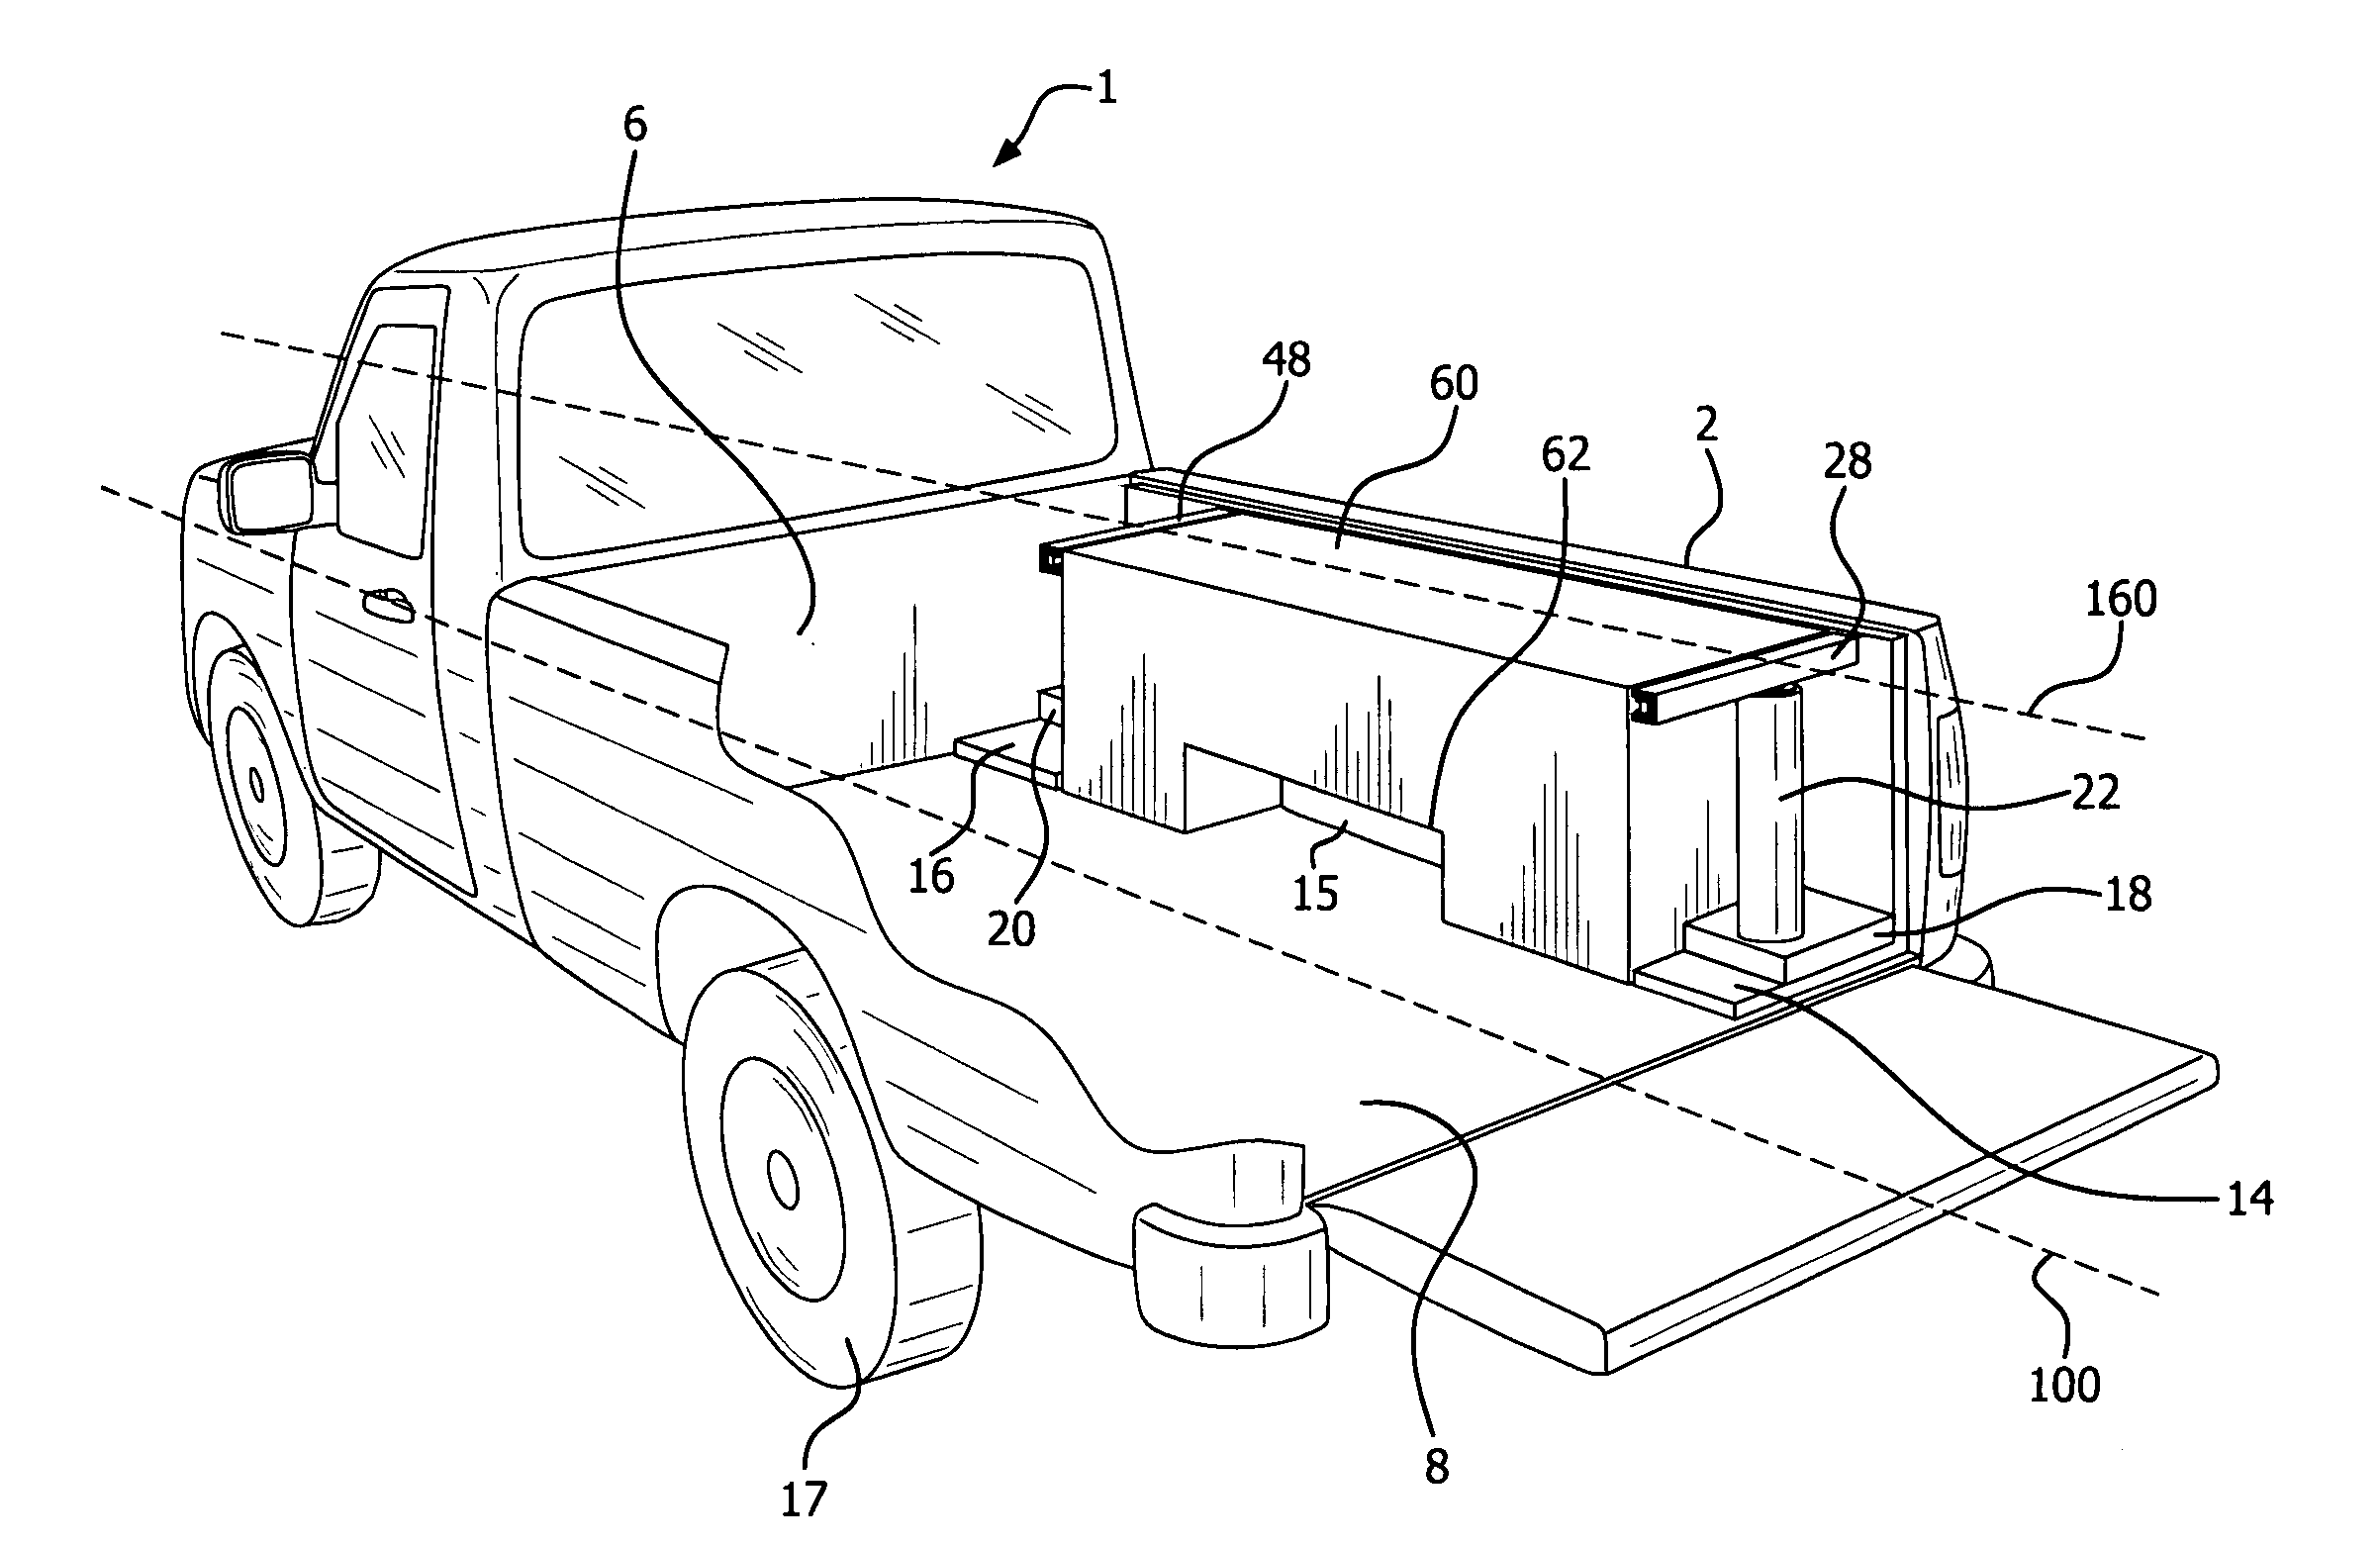 Pick-up truck bed tool box system